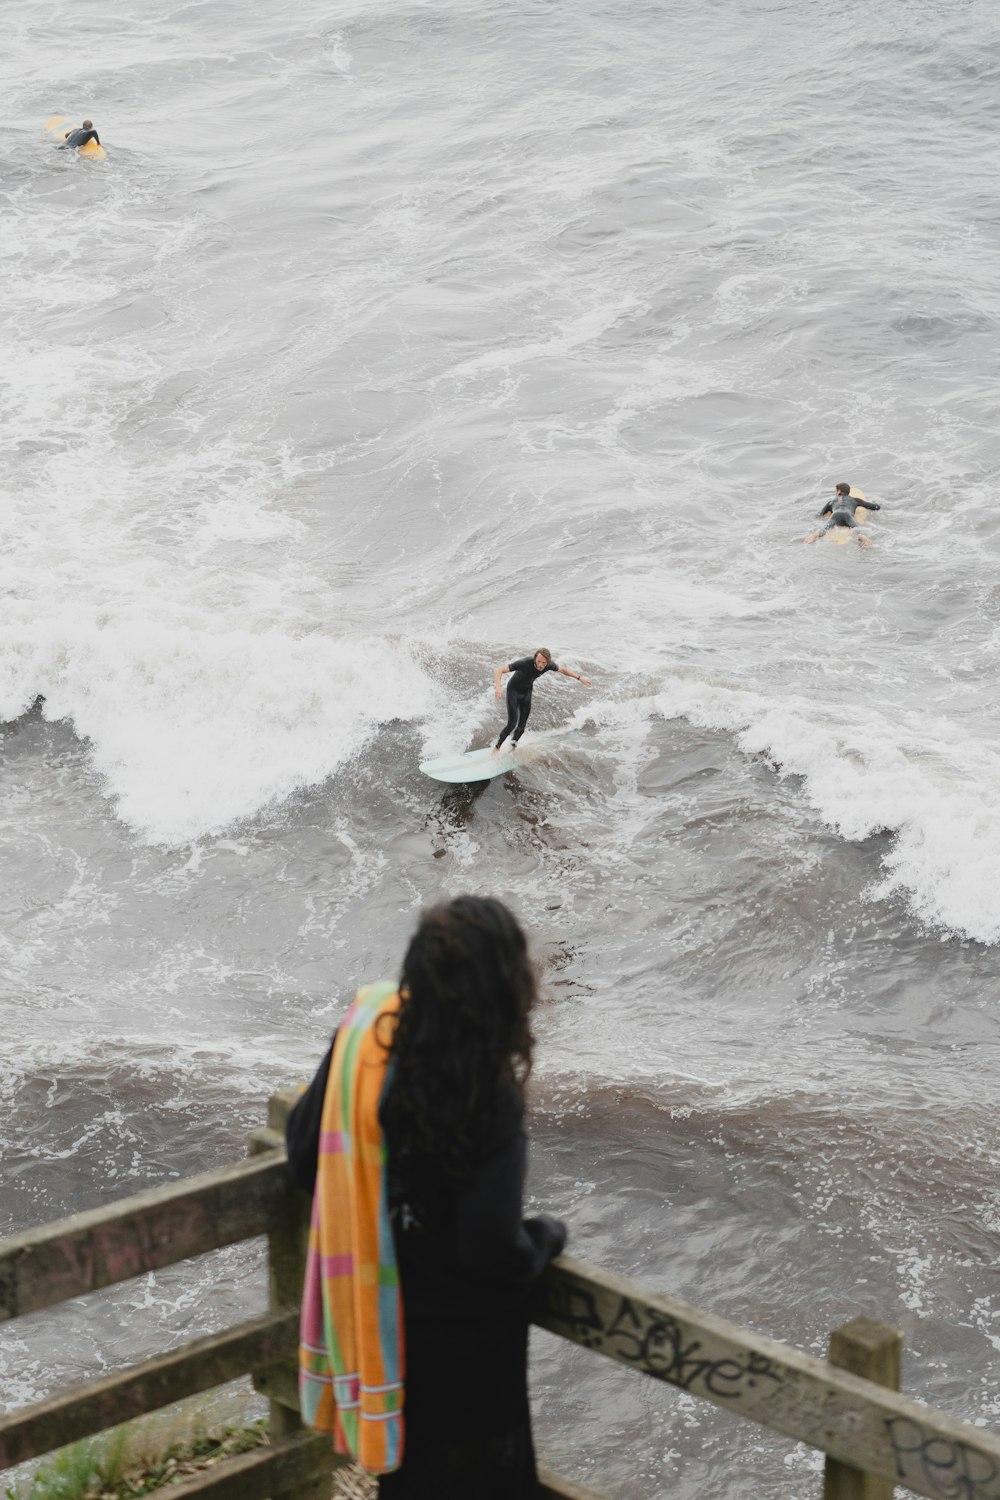 a woman watching surfers ride a wave in the ocean